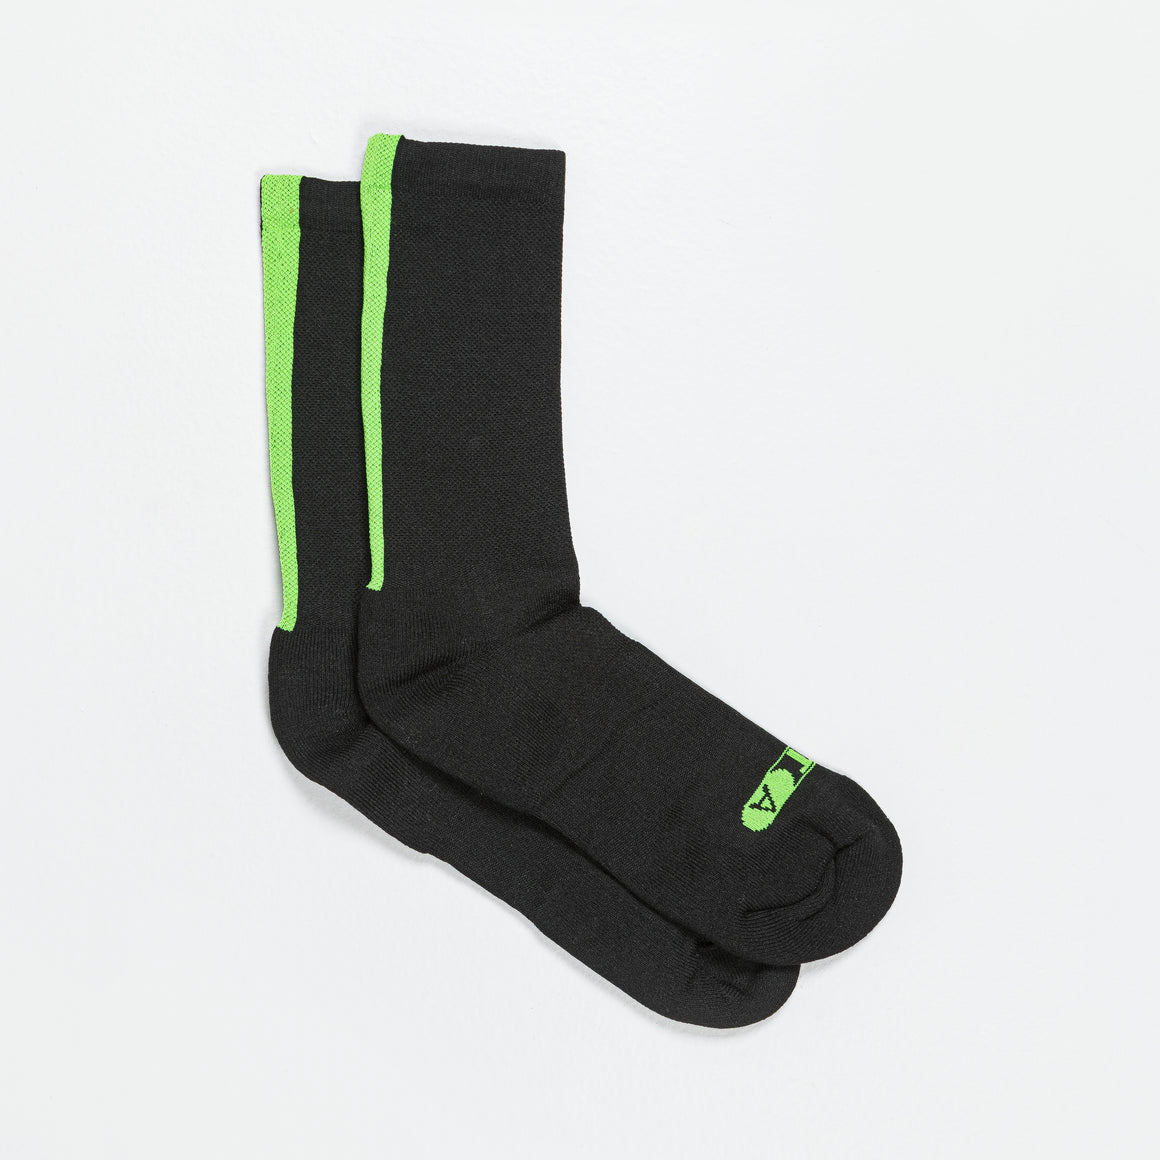 Up There Athletics - Performance Socks - Black/Electric Green - Up There Athletics